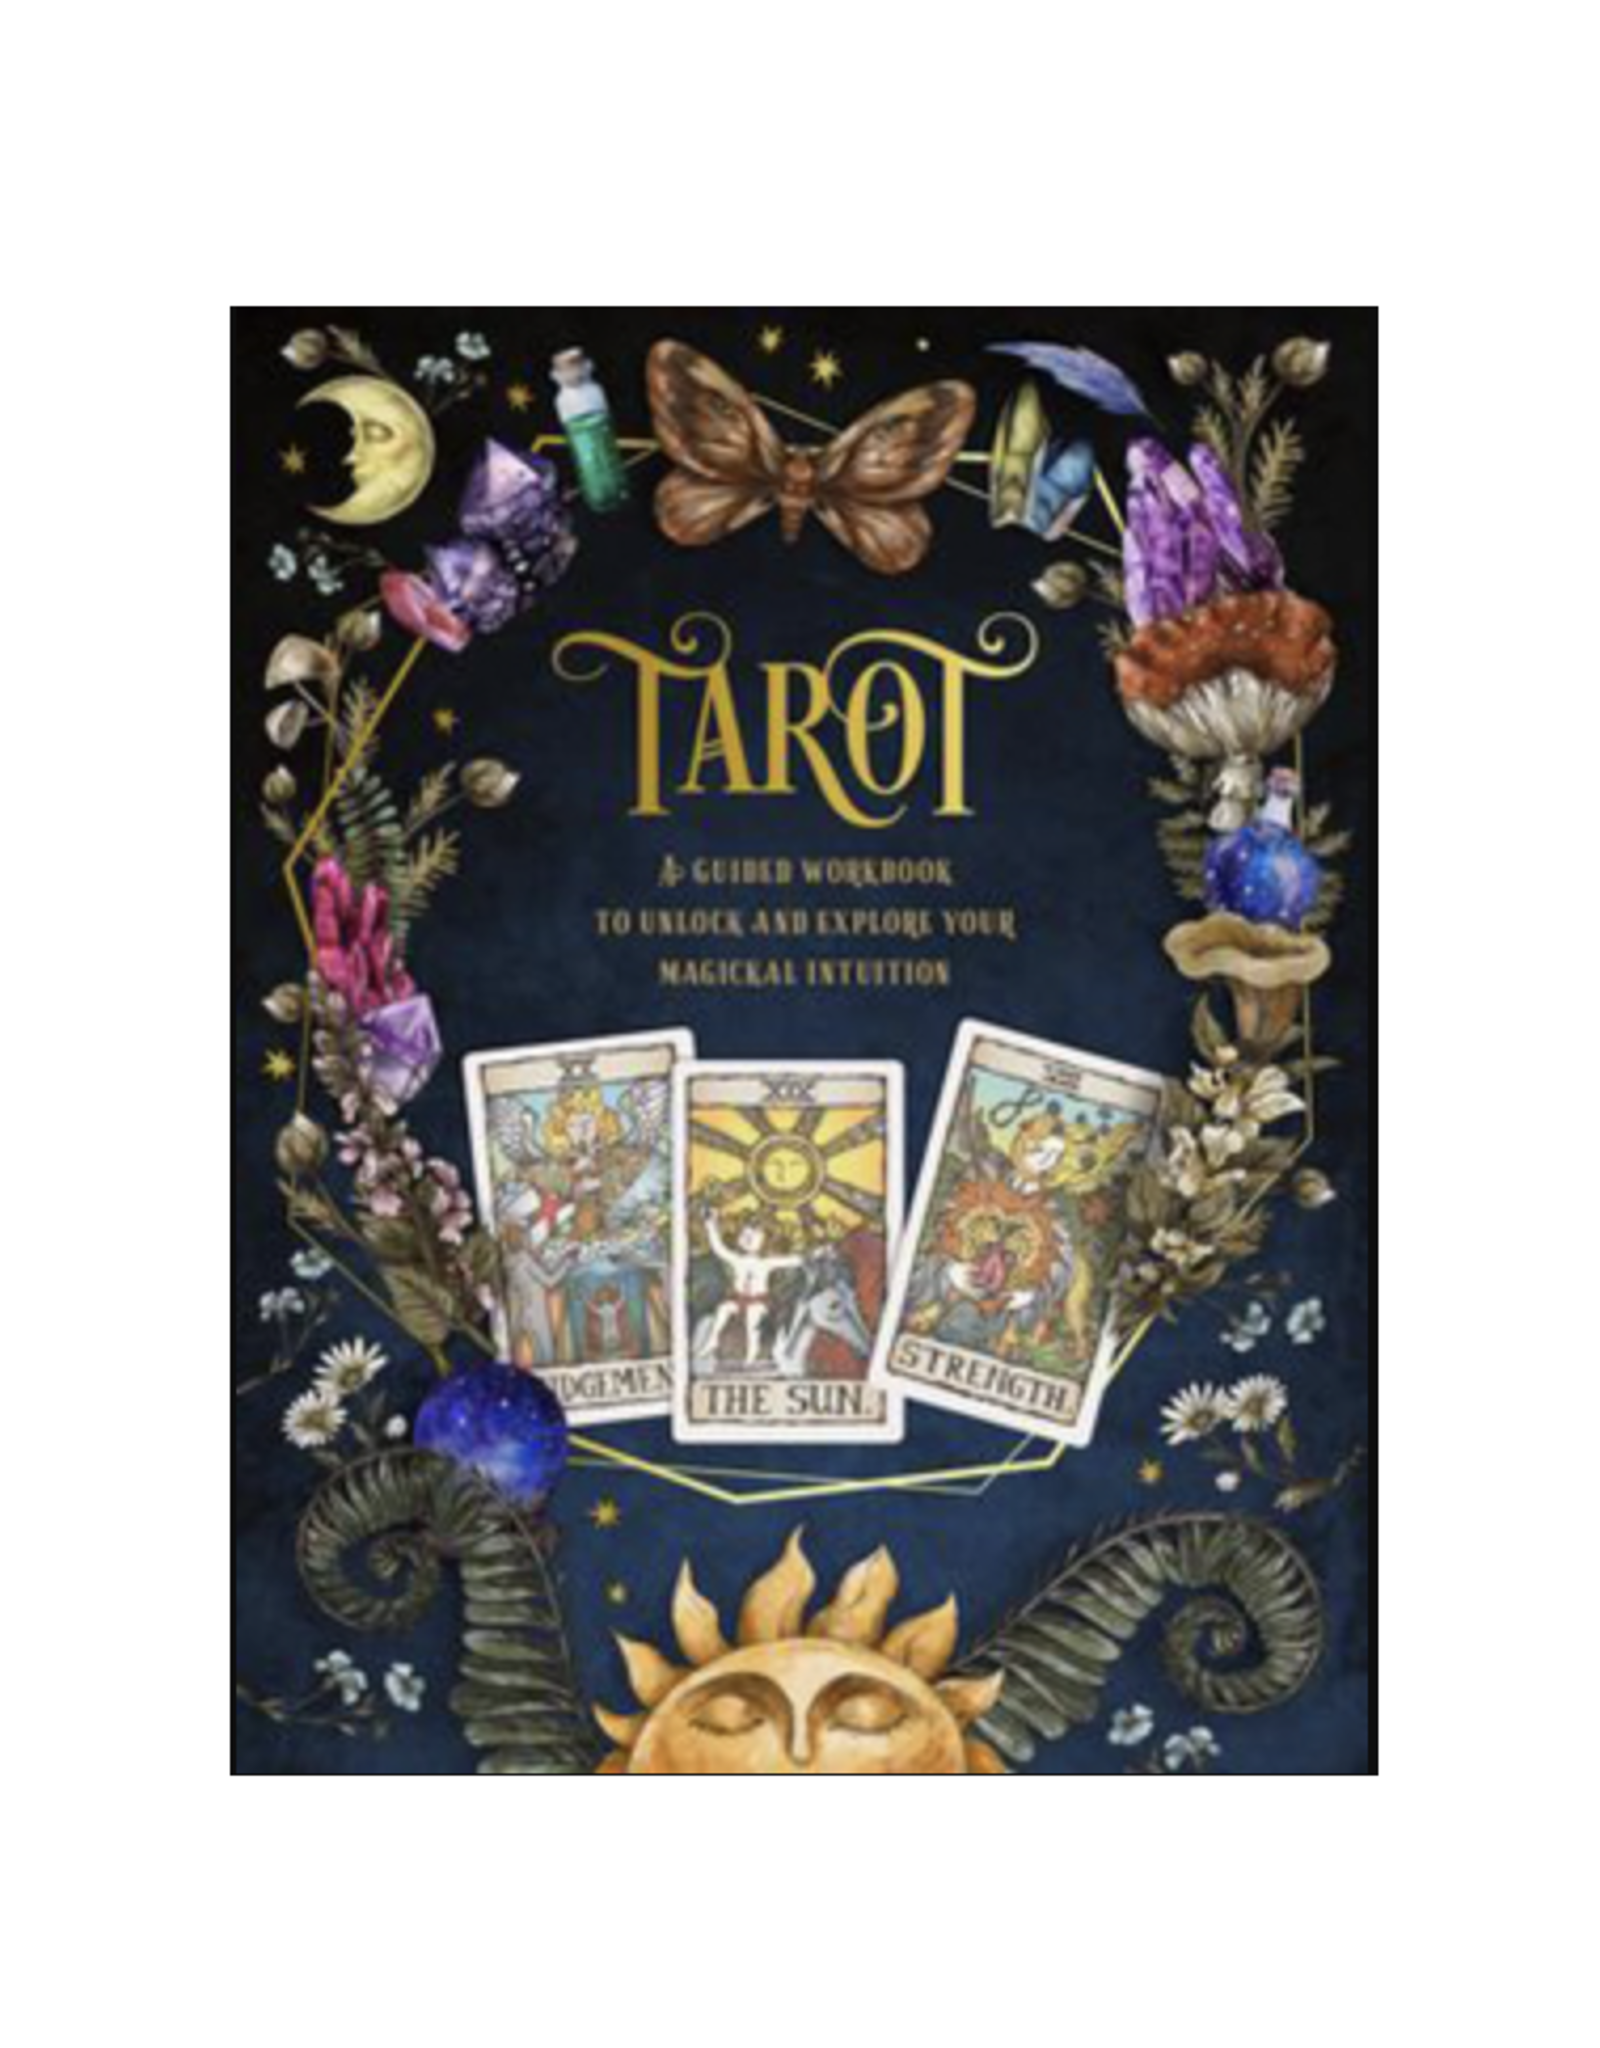 Tarot: A Guided Workbook to Unlock and Explore Your Magical Intuition